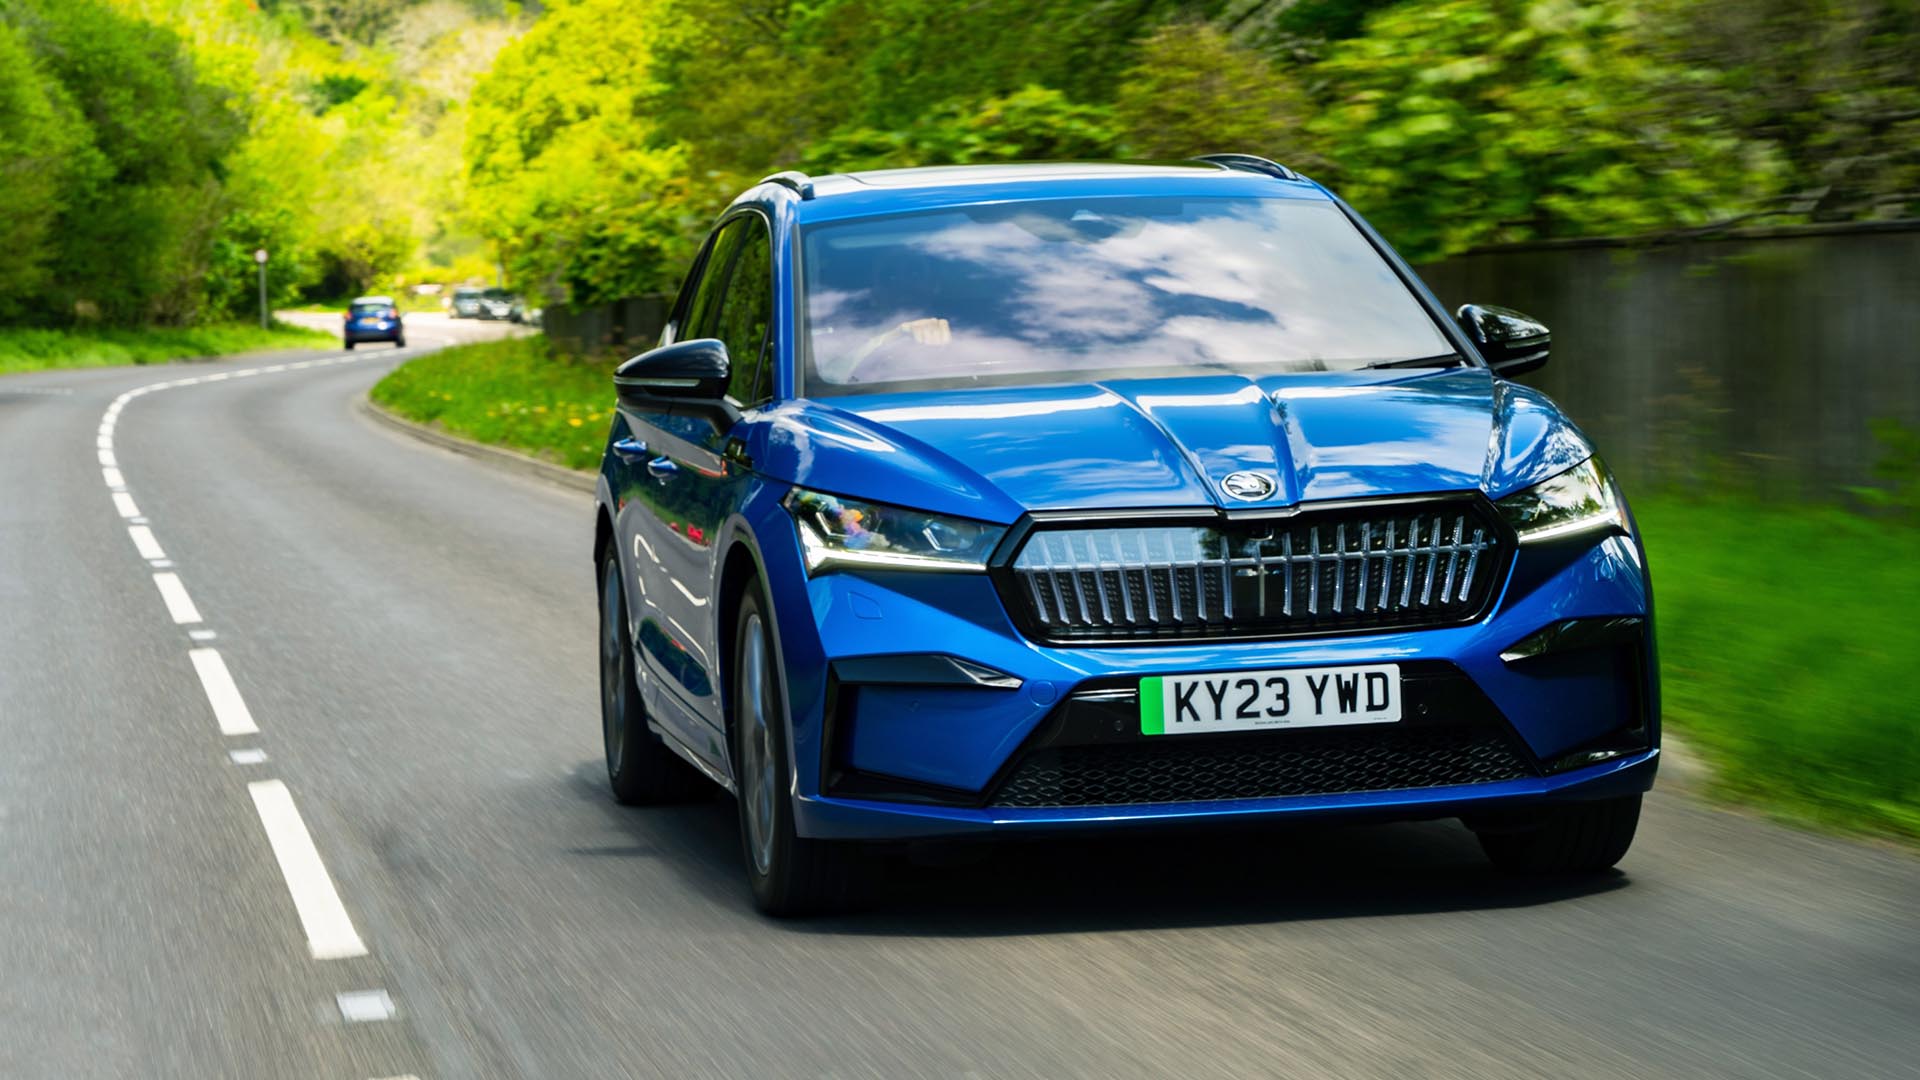 Skoda Enyaq RS electric SUV confirmed for July release